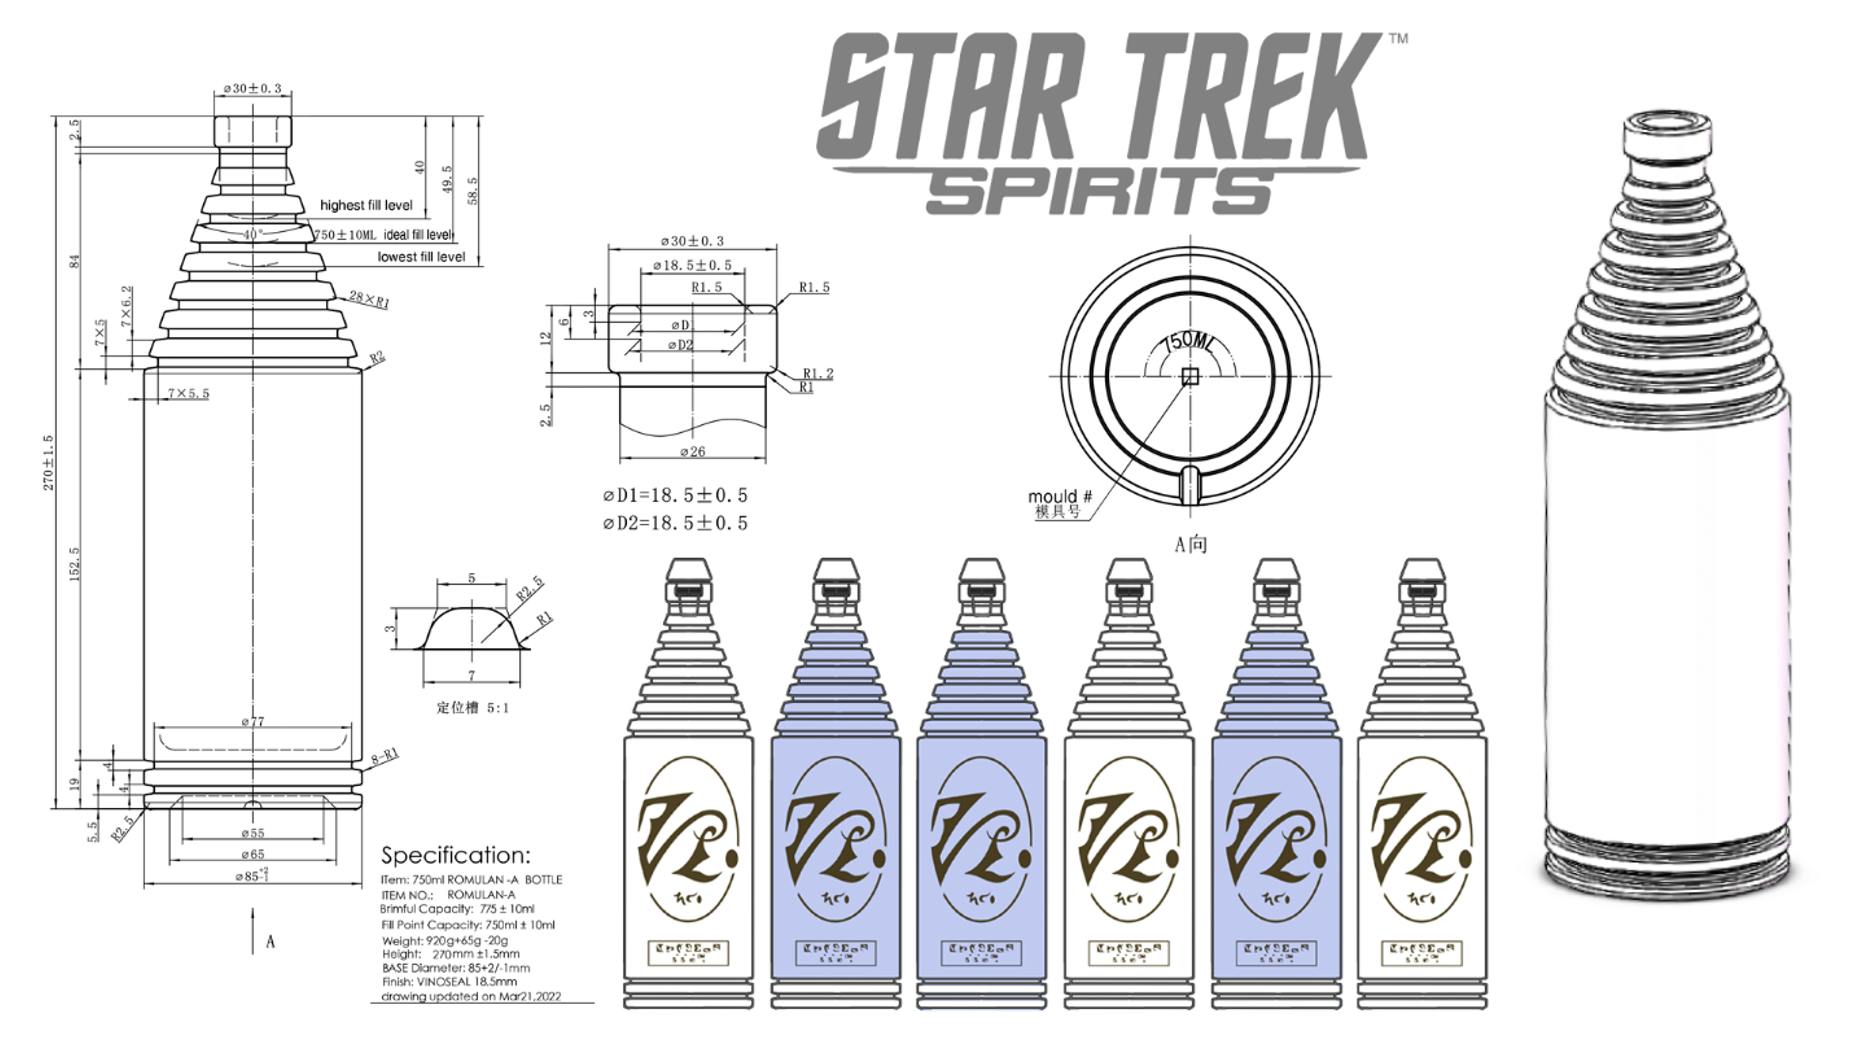 Schematics of the Romulan Ale bottles from Wines That Rock